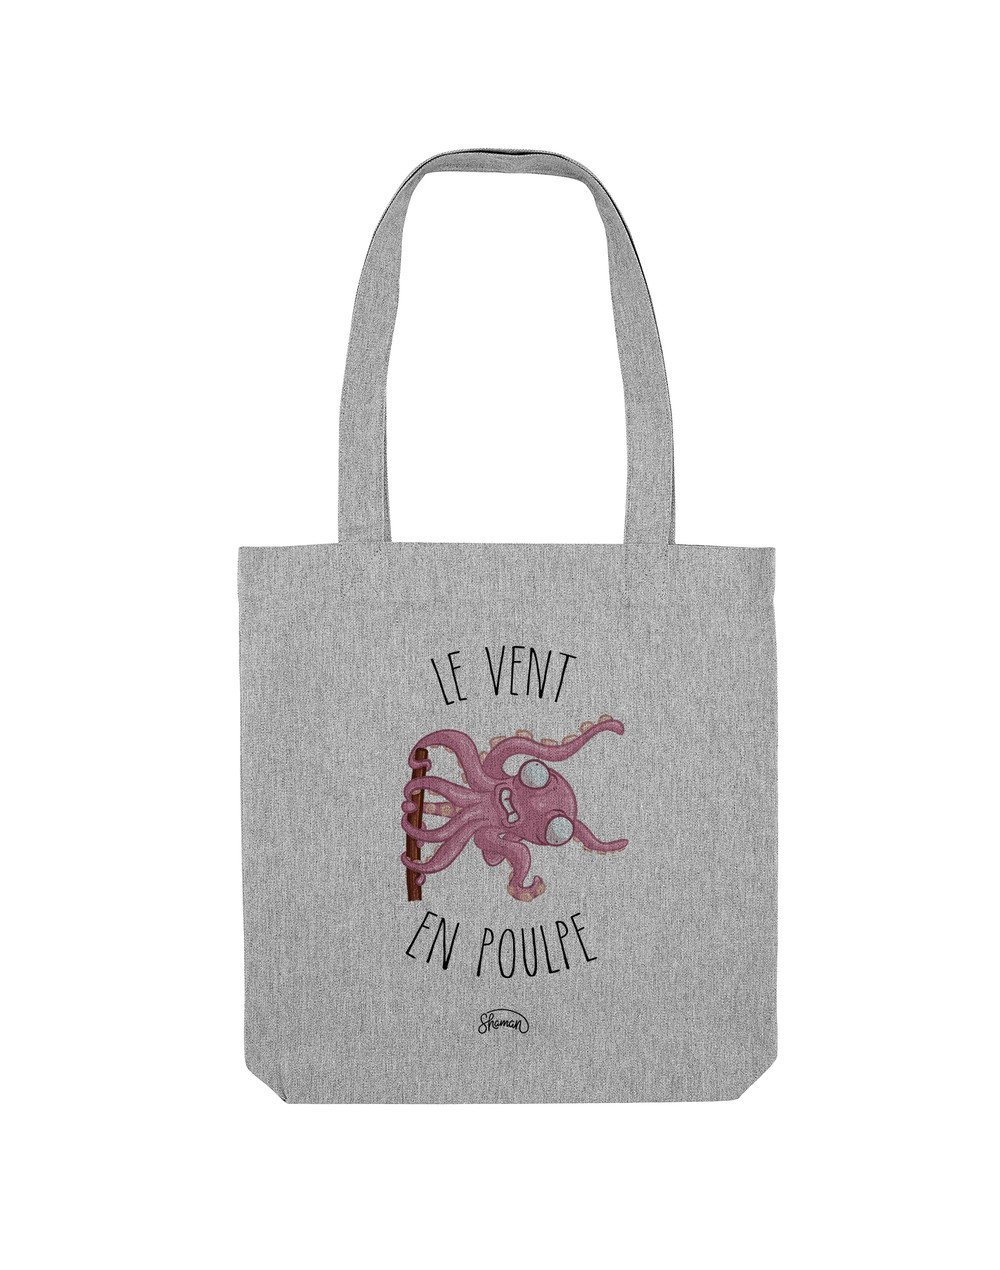 Tote Bag "Vent poulpe"